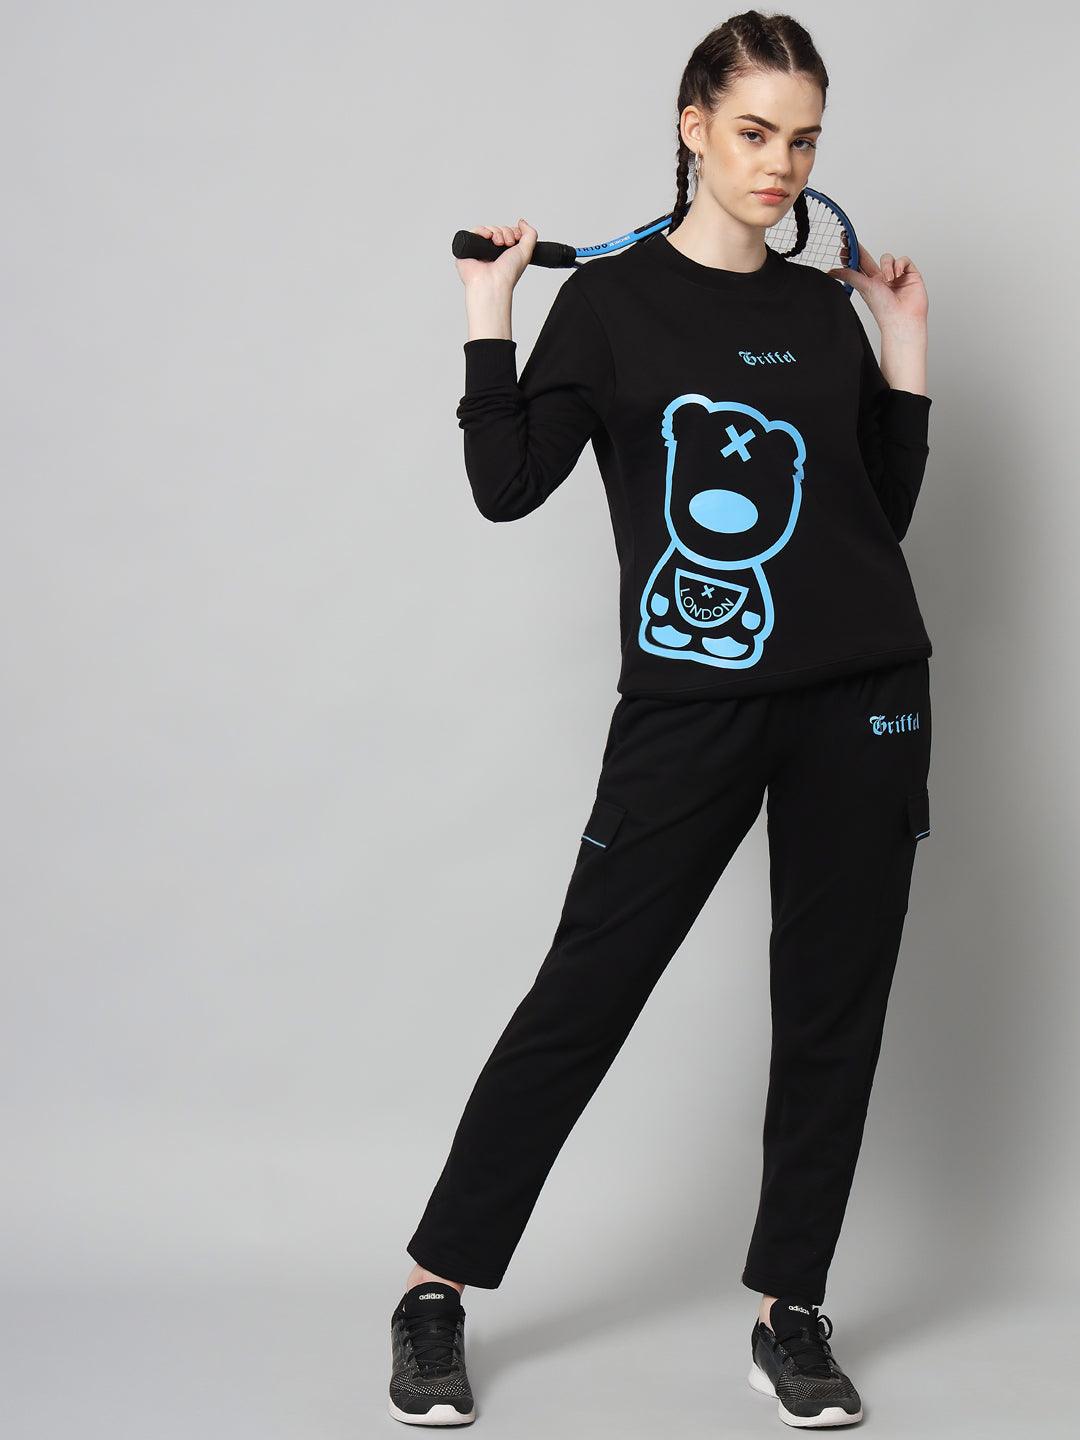 Griffel Women Teddy Print Fleece Round Neck and Joggers Full set Sky Black Tracksuit - griffel